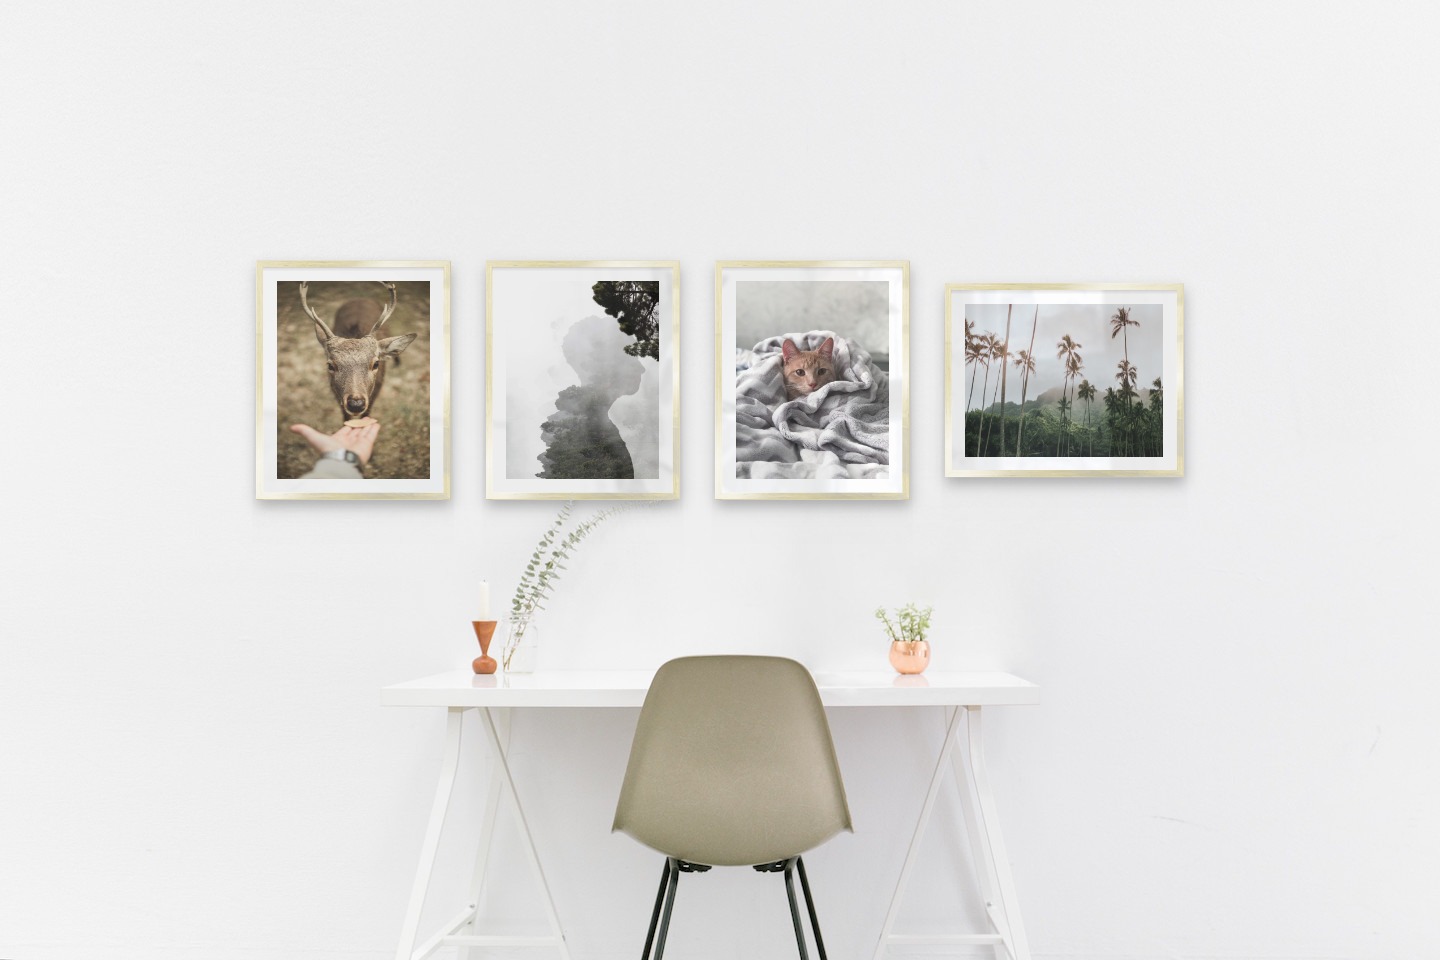 Gallery wall with picture frames in gold in sizes 40x50 with prints "Feed a deer", "Silhouette and tree", "Cat in felt" and "Palm trees and mountains"